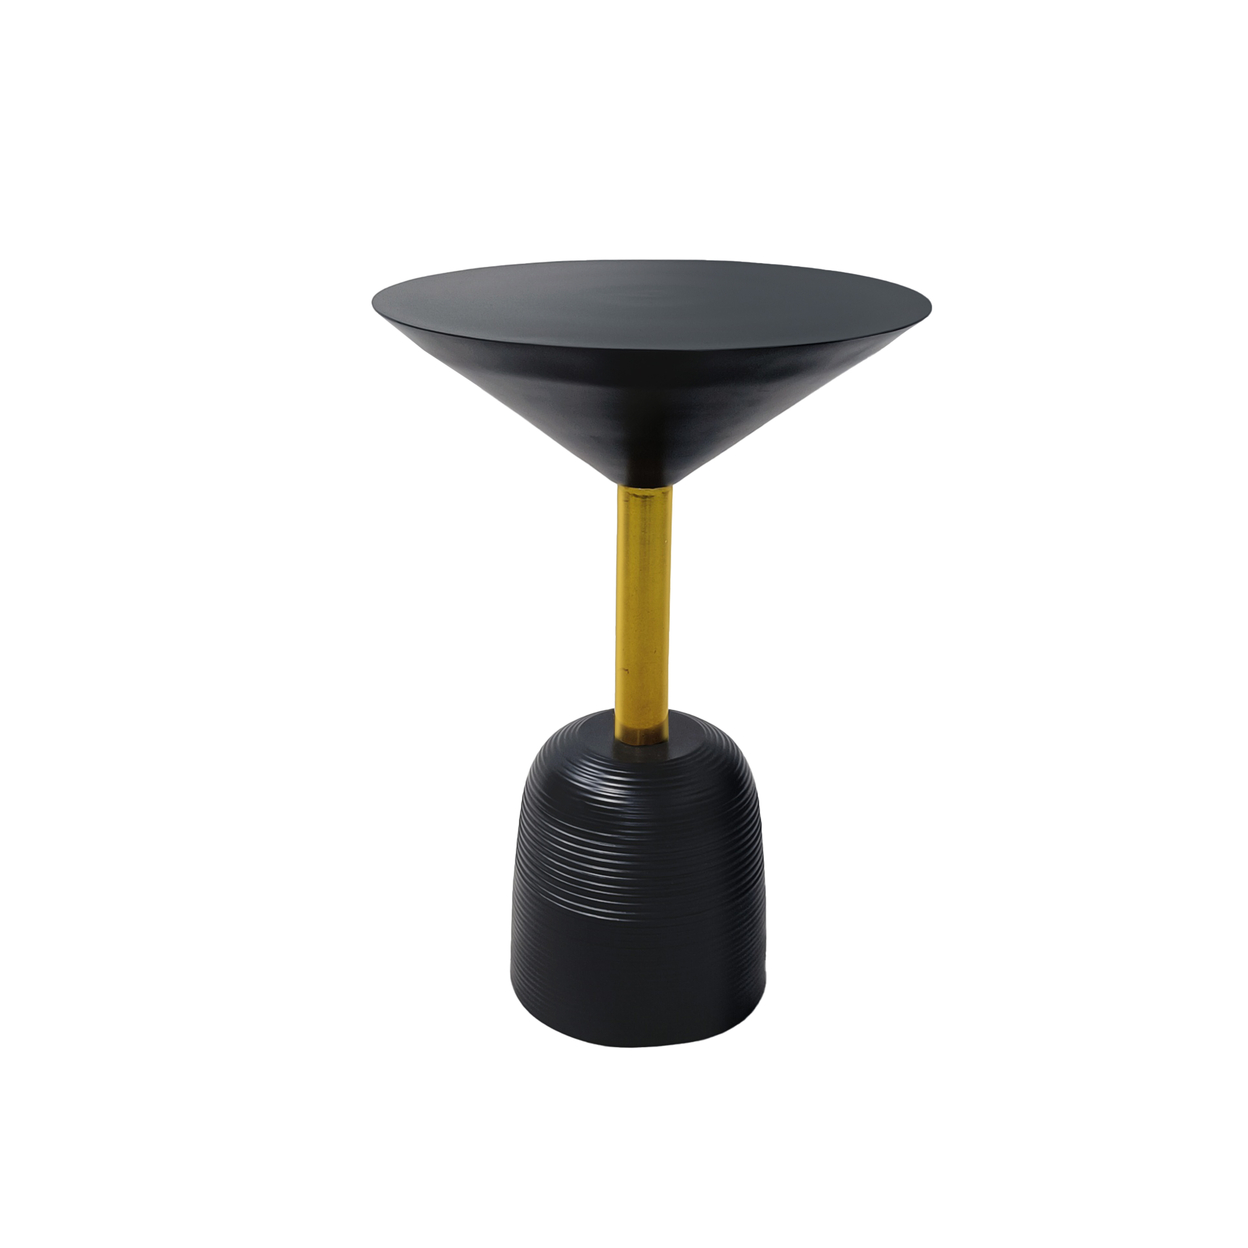 12 Inch Round Cocktail Side End Table, Aluminum Cast Top And Dome Base, Black, Brass - Saltoro Sherpi